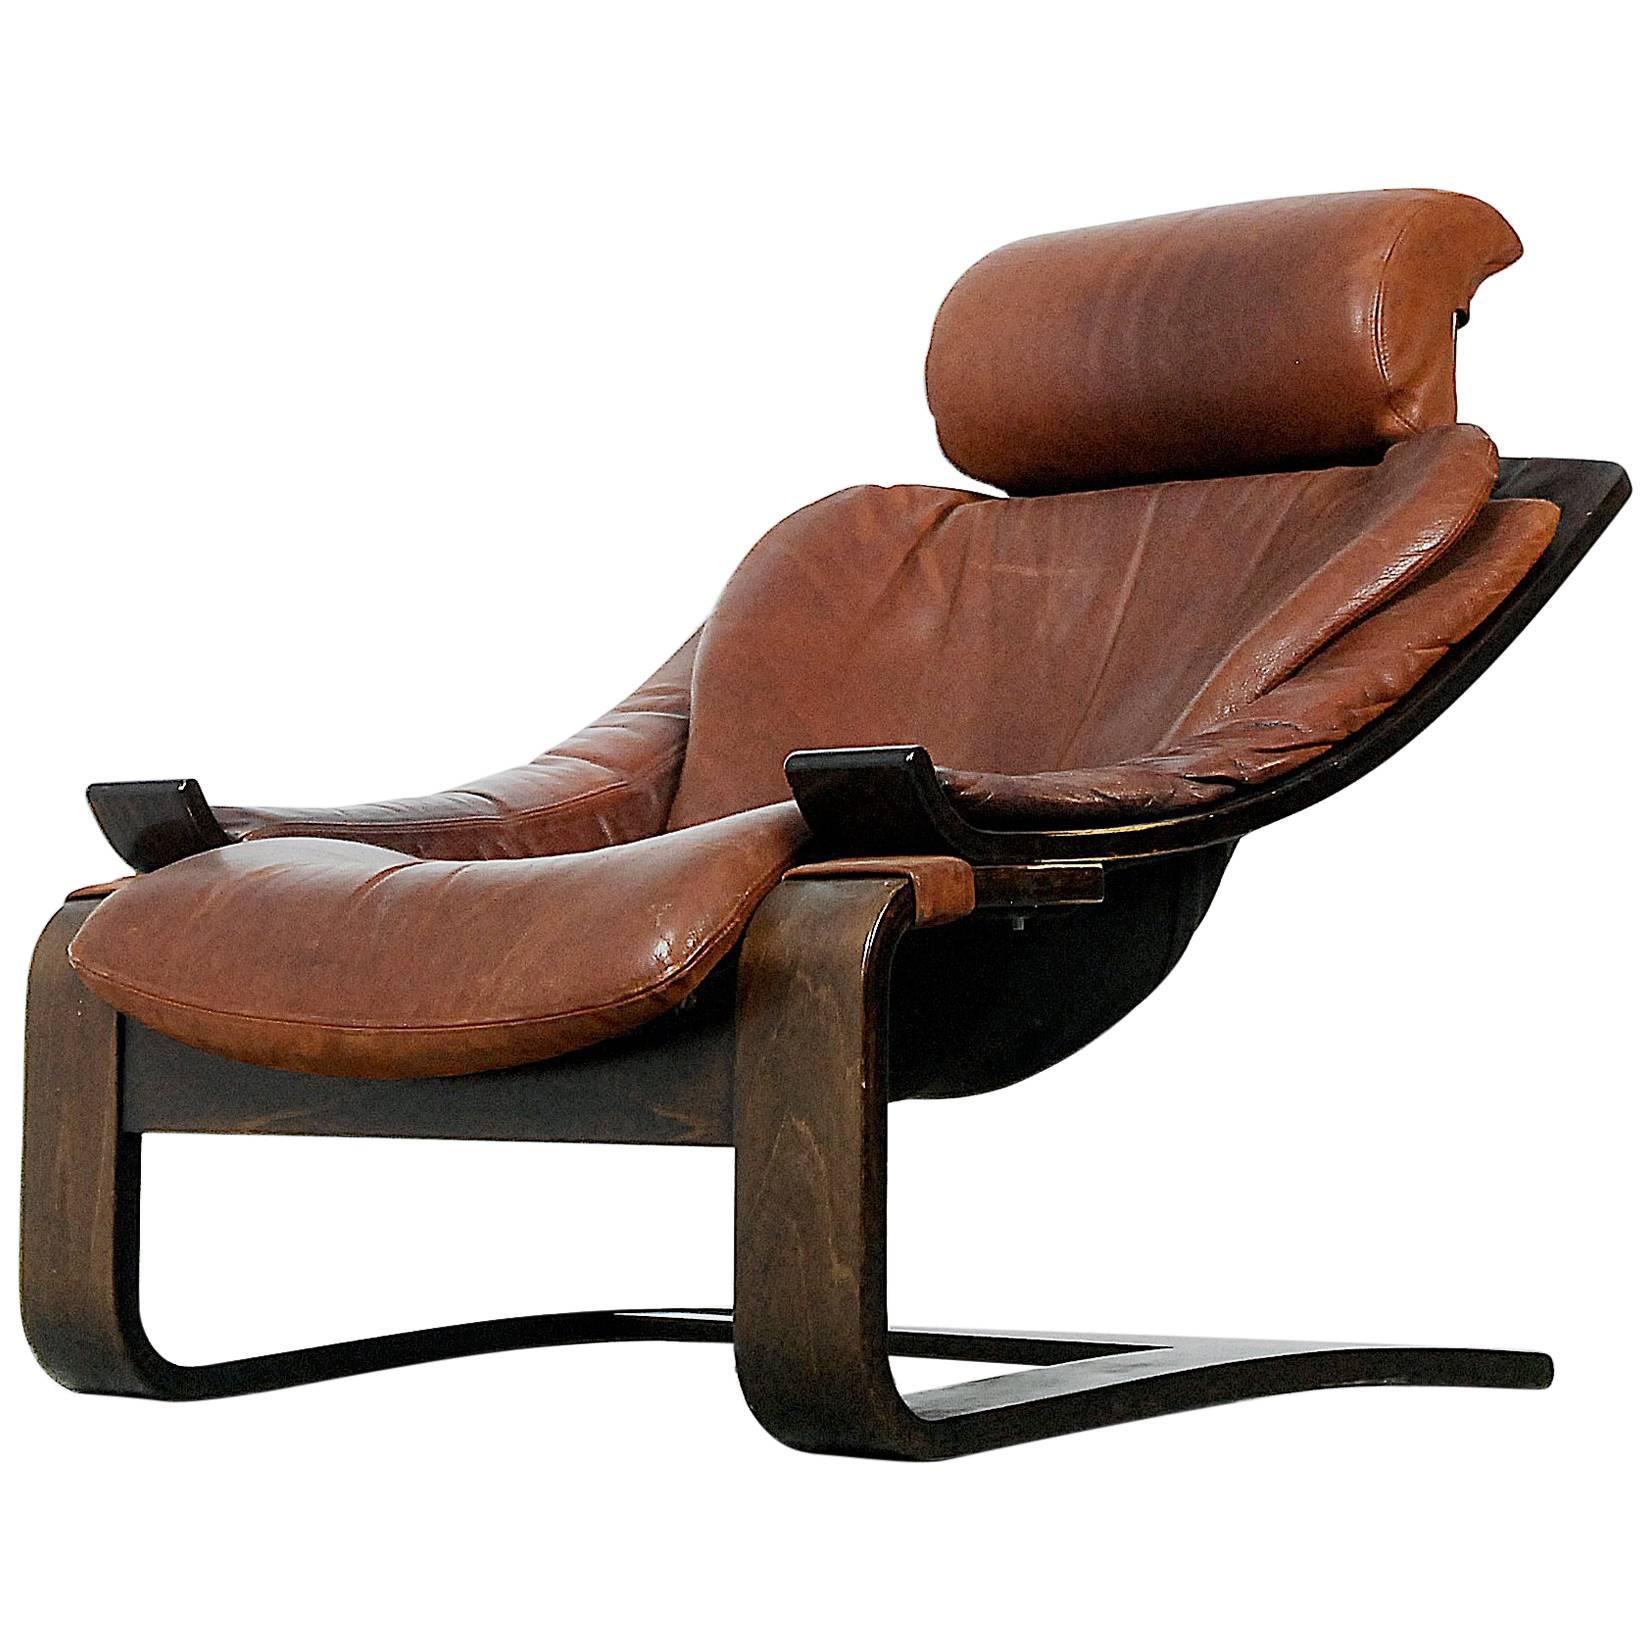 Vintage Swedish Leather Kroken Chair by Ake Fribytter for Nelo, 1974 For Sale